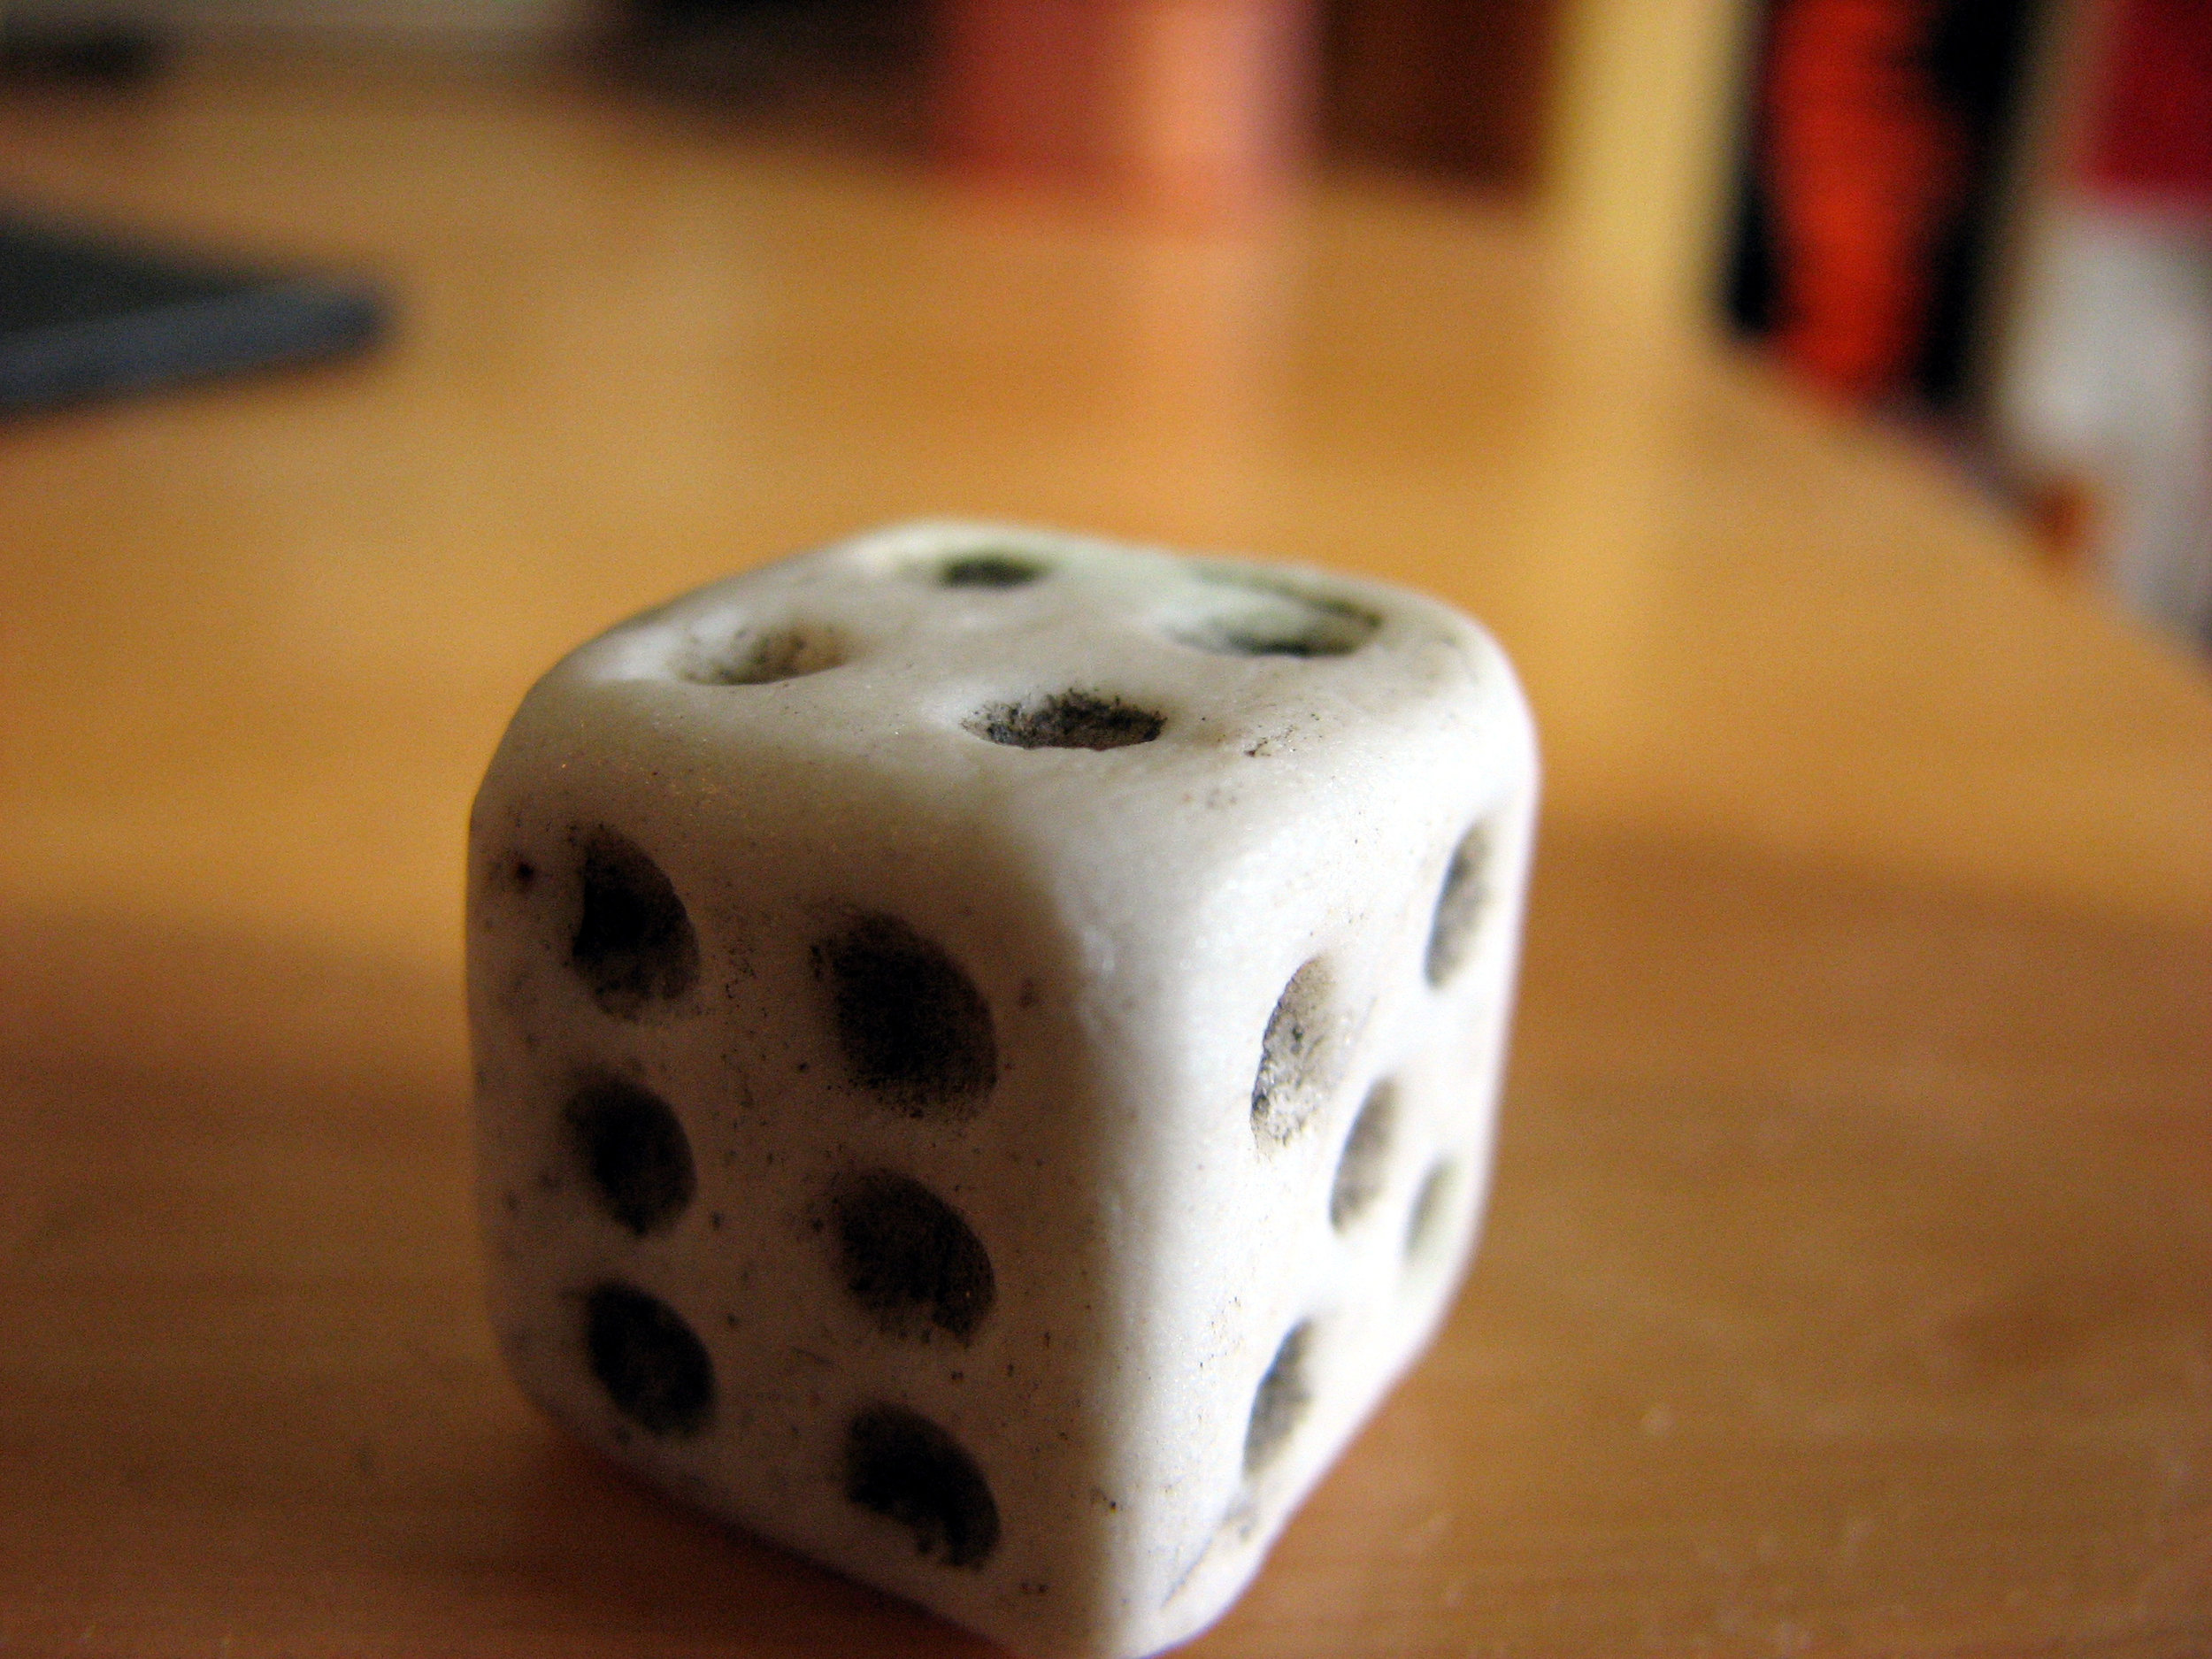 Rolling the dice on traditional media